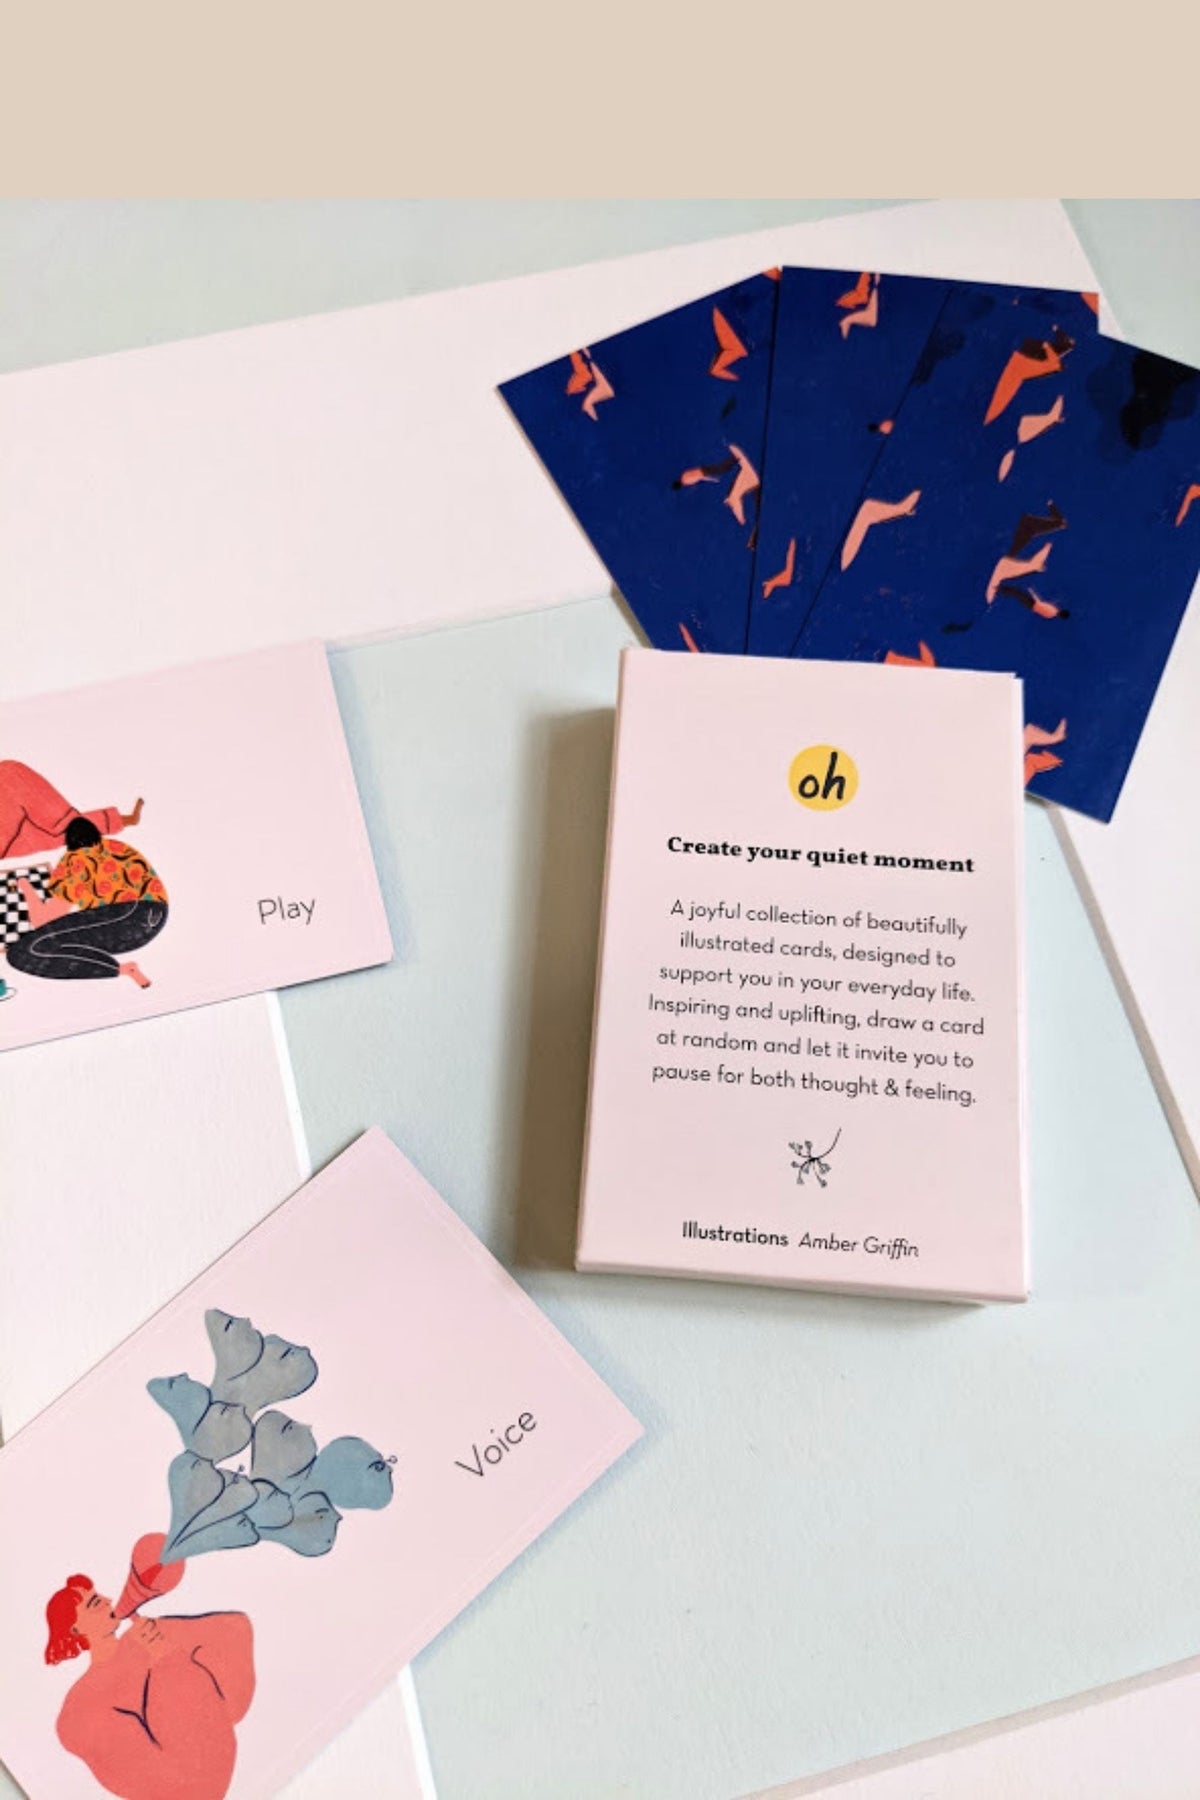 Oh Mindful Play Cards